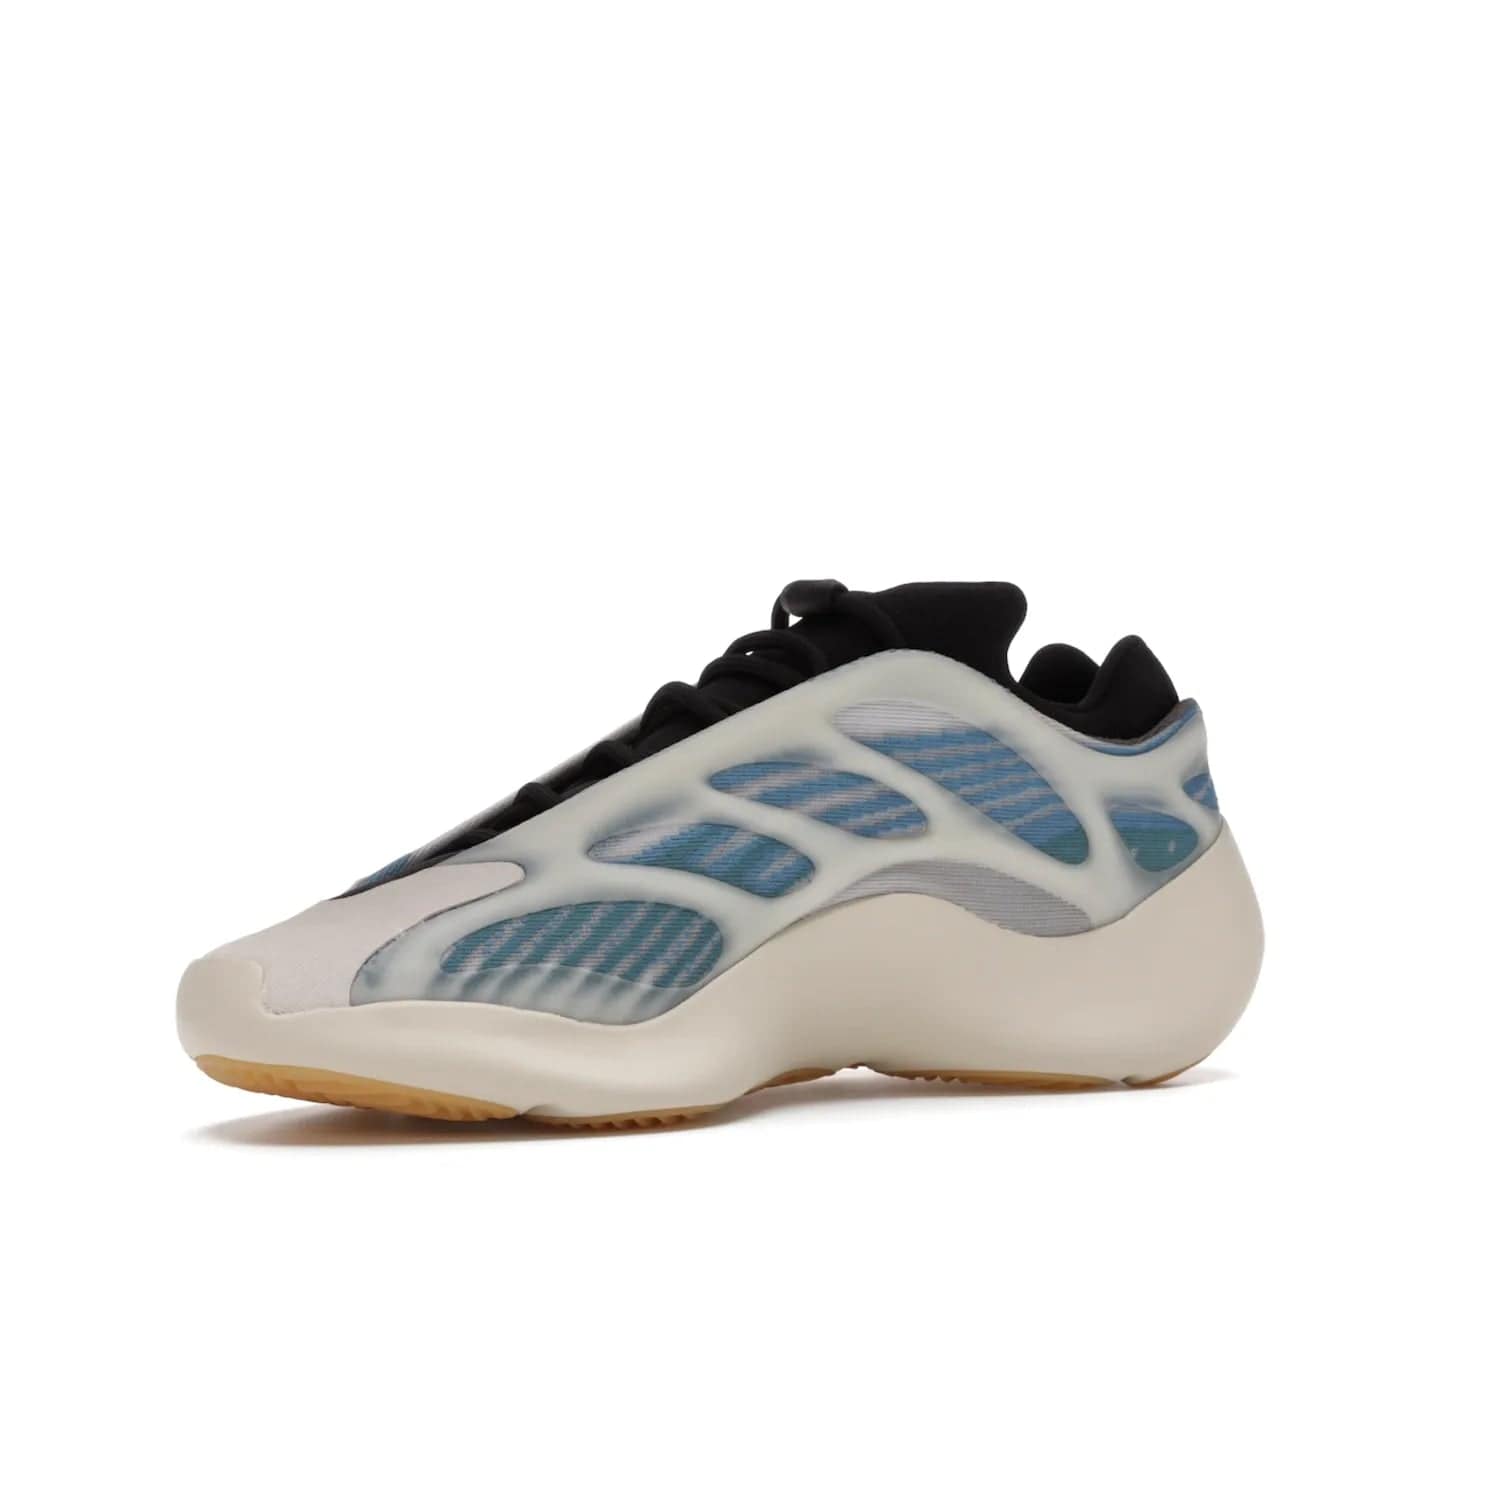 adidas Yeezy 700 V3 Kyanite - Image 16 - Only at www.BallersClubKickz.com - The adidas Yeezy 700 V3 Kyanite offers a layered design featuring a glow-in-the-dark TPU cage and a tonal cream-colored EVA foam midsole. With its herringbone-patterned outsole, the style and comfort of the sneaker will accompany you anywhere. Released in March 2021, it's a great addition to any sneaker wardrobe.